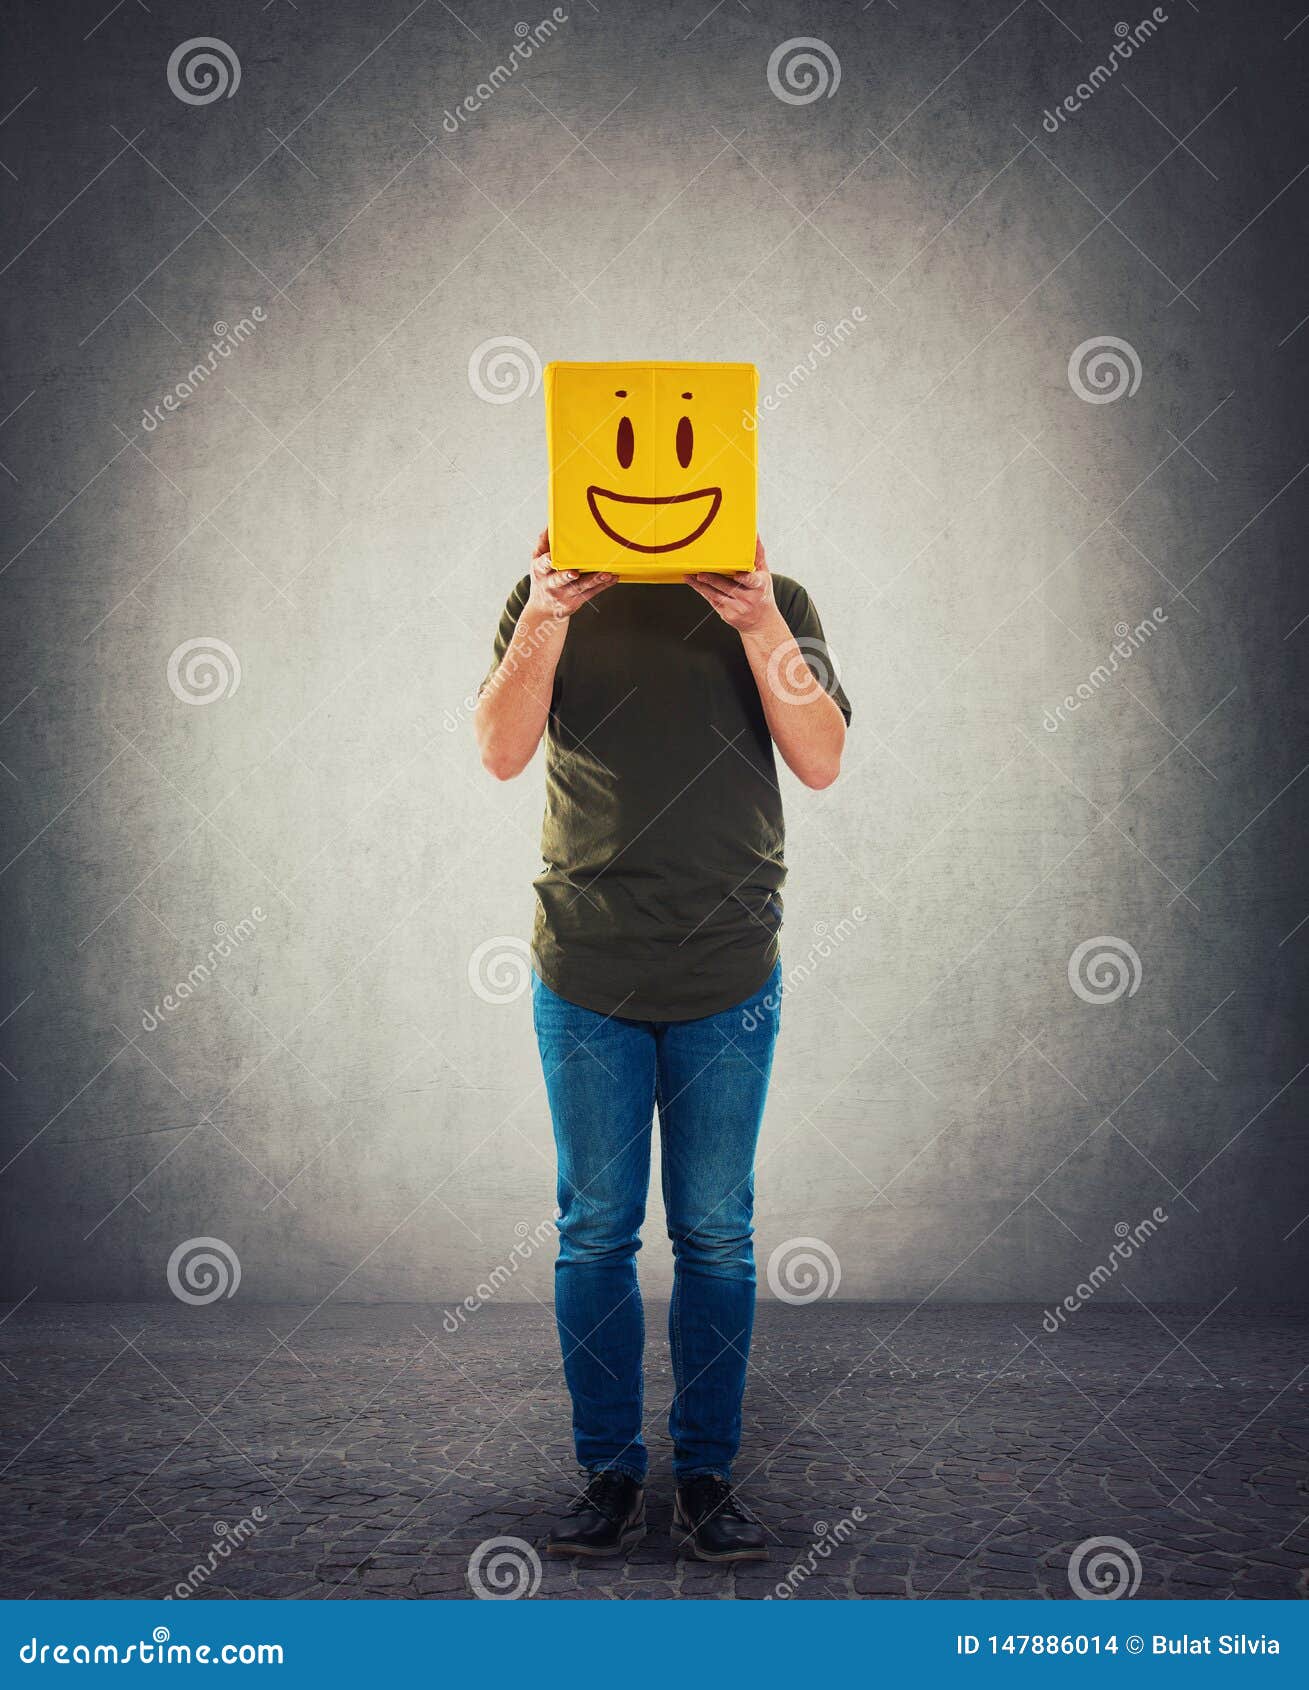 Incognito Person Holding a Yellow Box instead Head. Introvert Anonymous  Hiding Face Behind Mask Stock Photo - Image of head, personality: 147886014